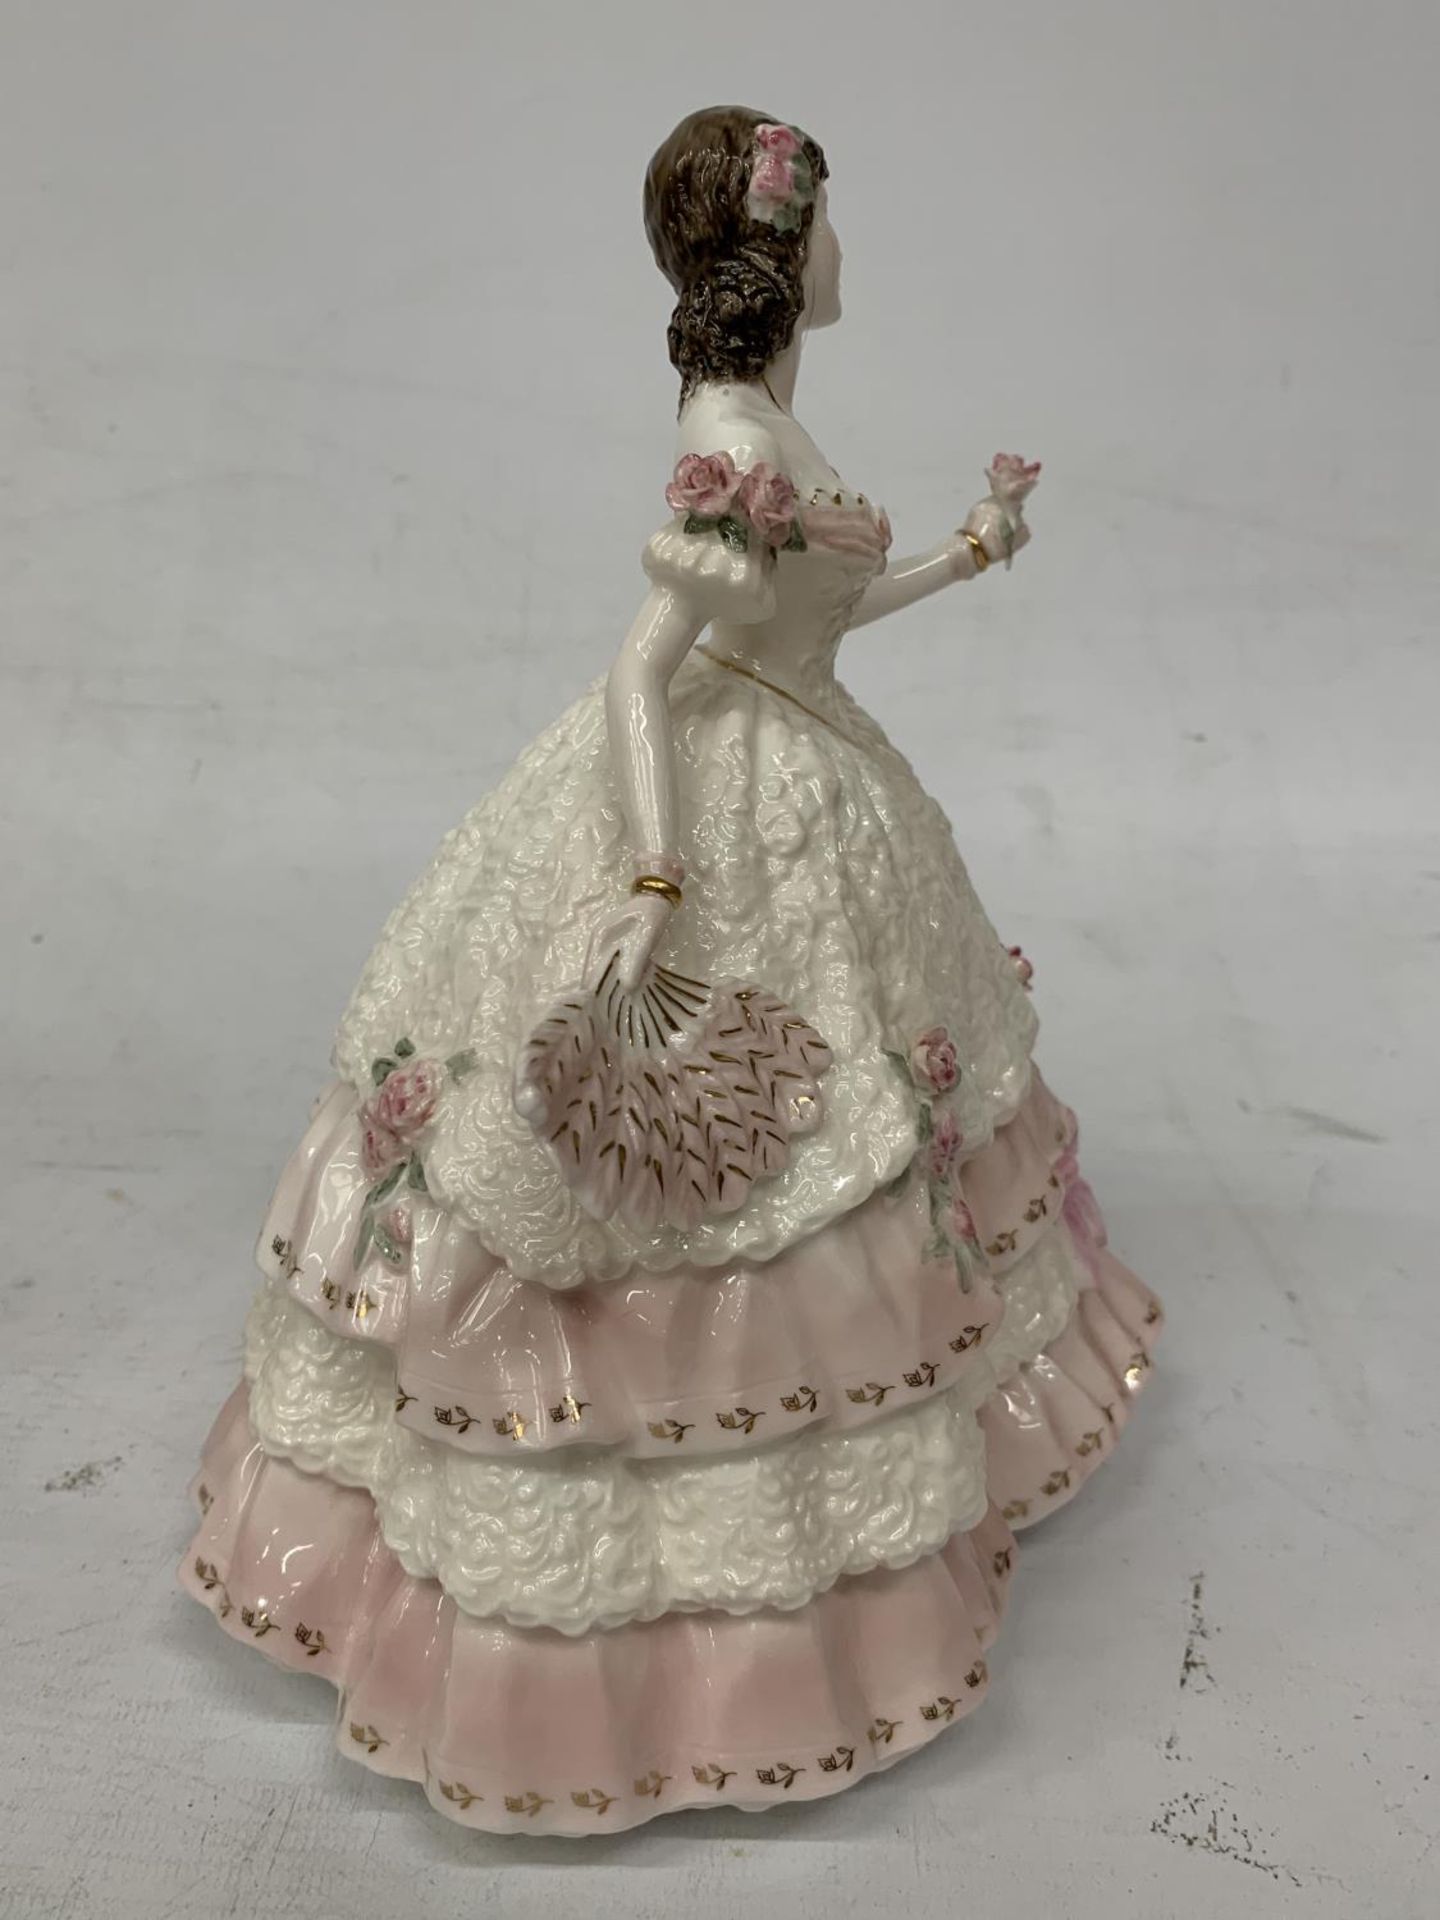 A COALPORT FIGURINE "OLIVIA" COALPORT HEIRLOOM FIGURINE OF THE YEAR 1997 ISSUED STRICTLY TO 1997 - Image 4 of 5